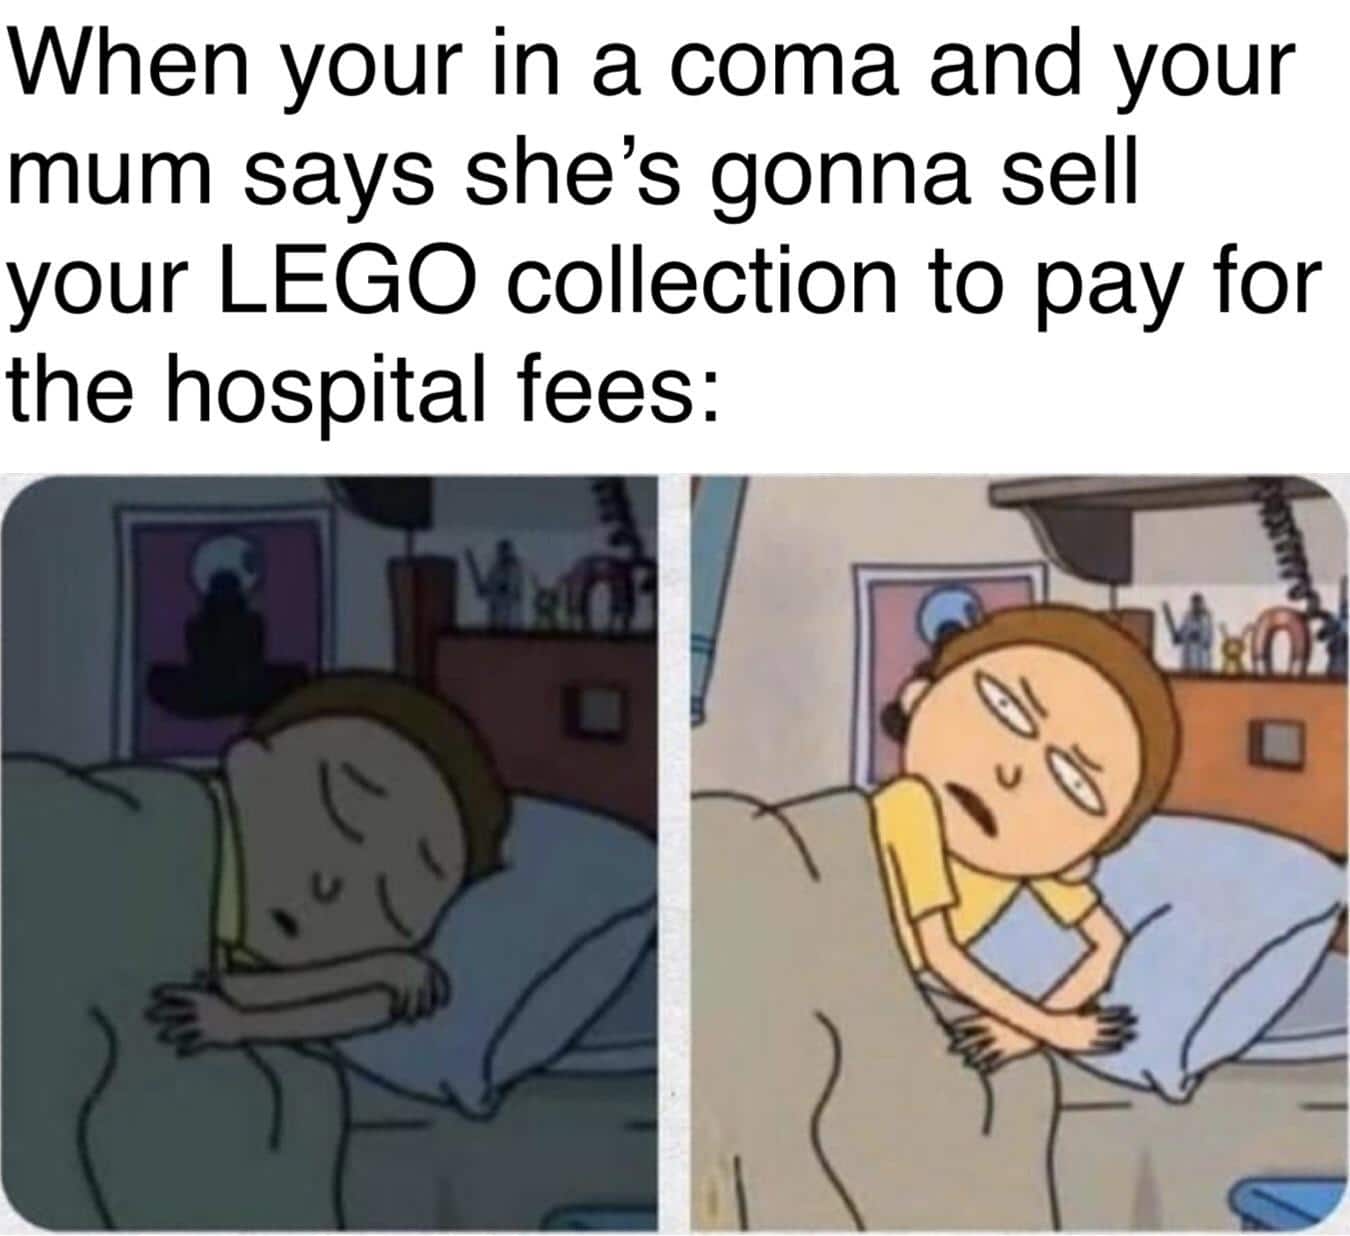 Dank, European, Laughs, Legos, LEGO, Visit Dank Memes Dank, European, Laughs, Legos, LEGO, Visit text: When your in a coma and your mum says she's gonna sell your LEGO collection to pay for the hospital fees: 